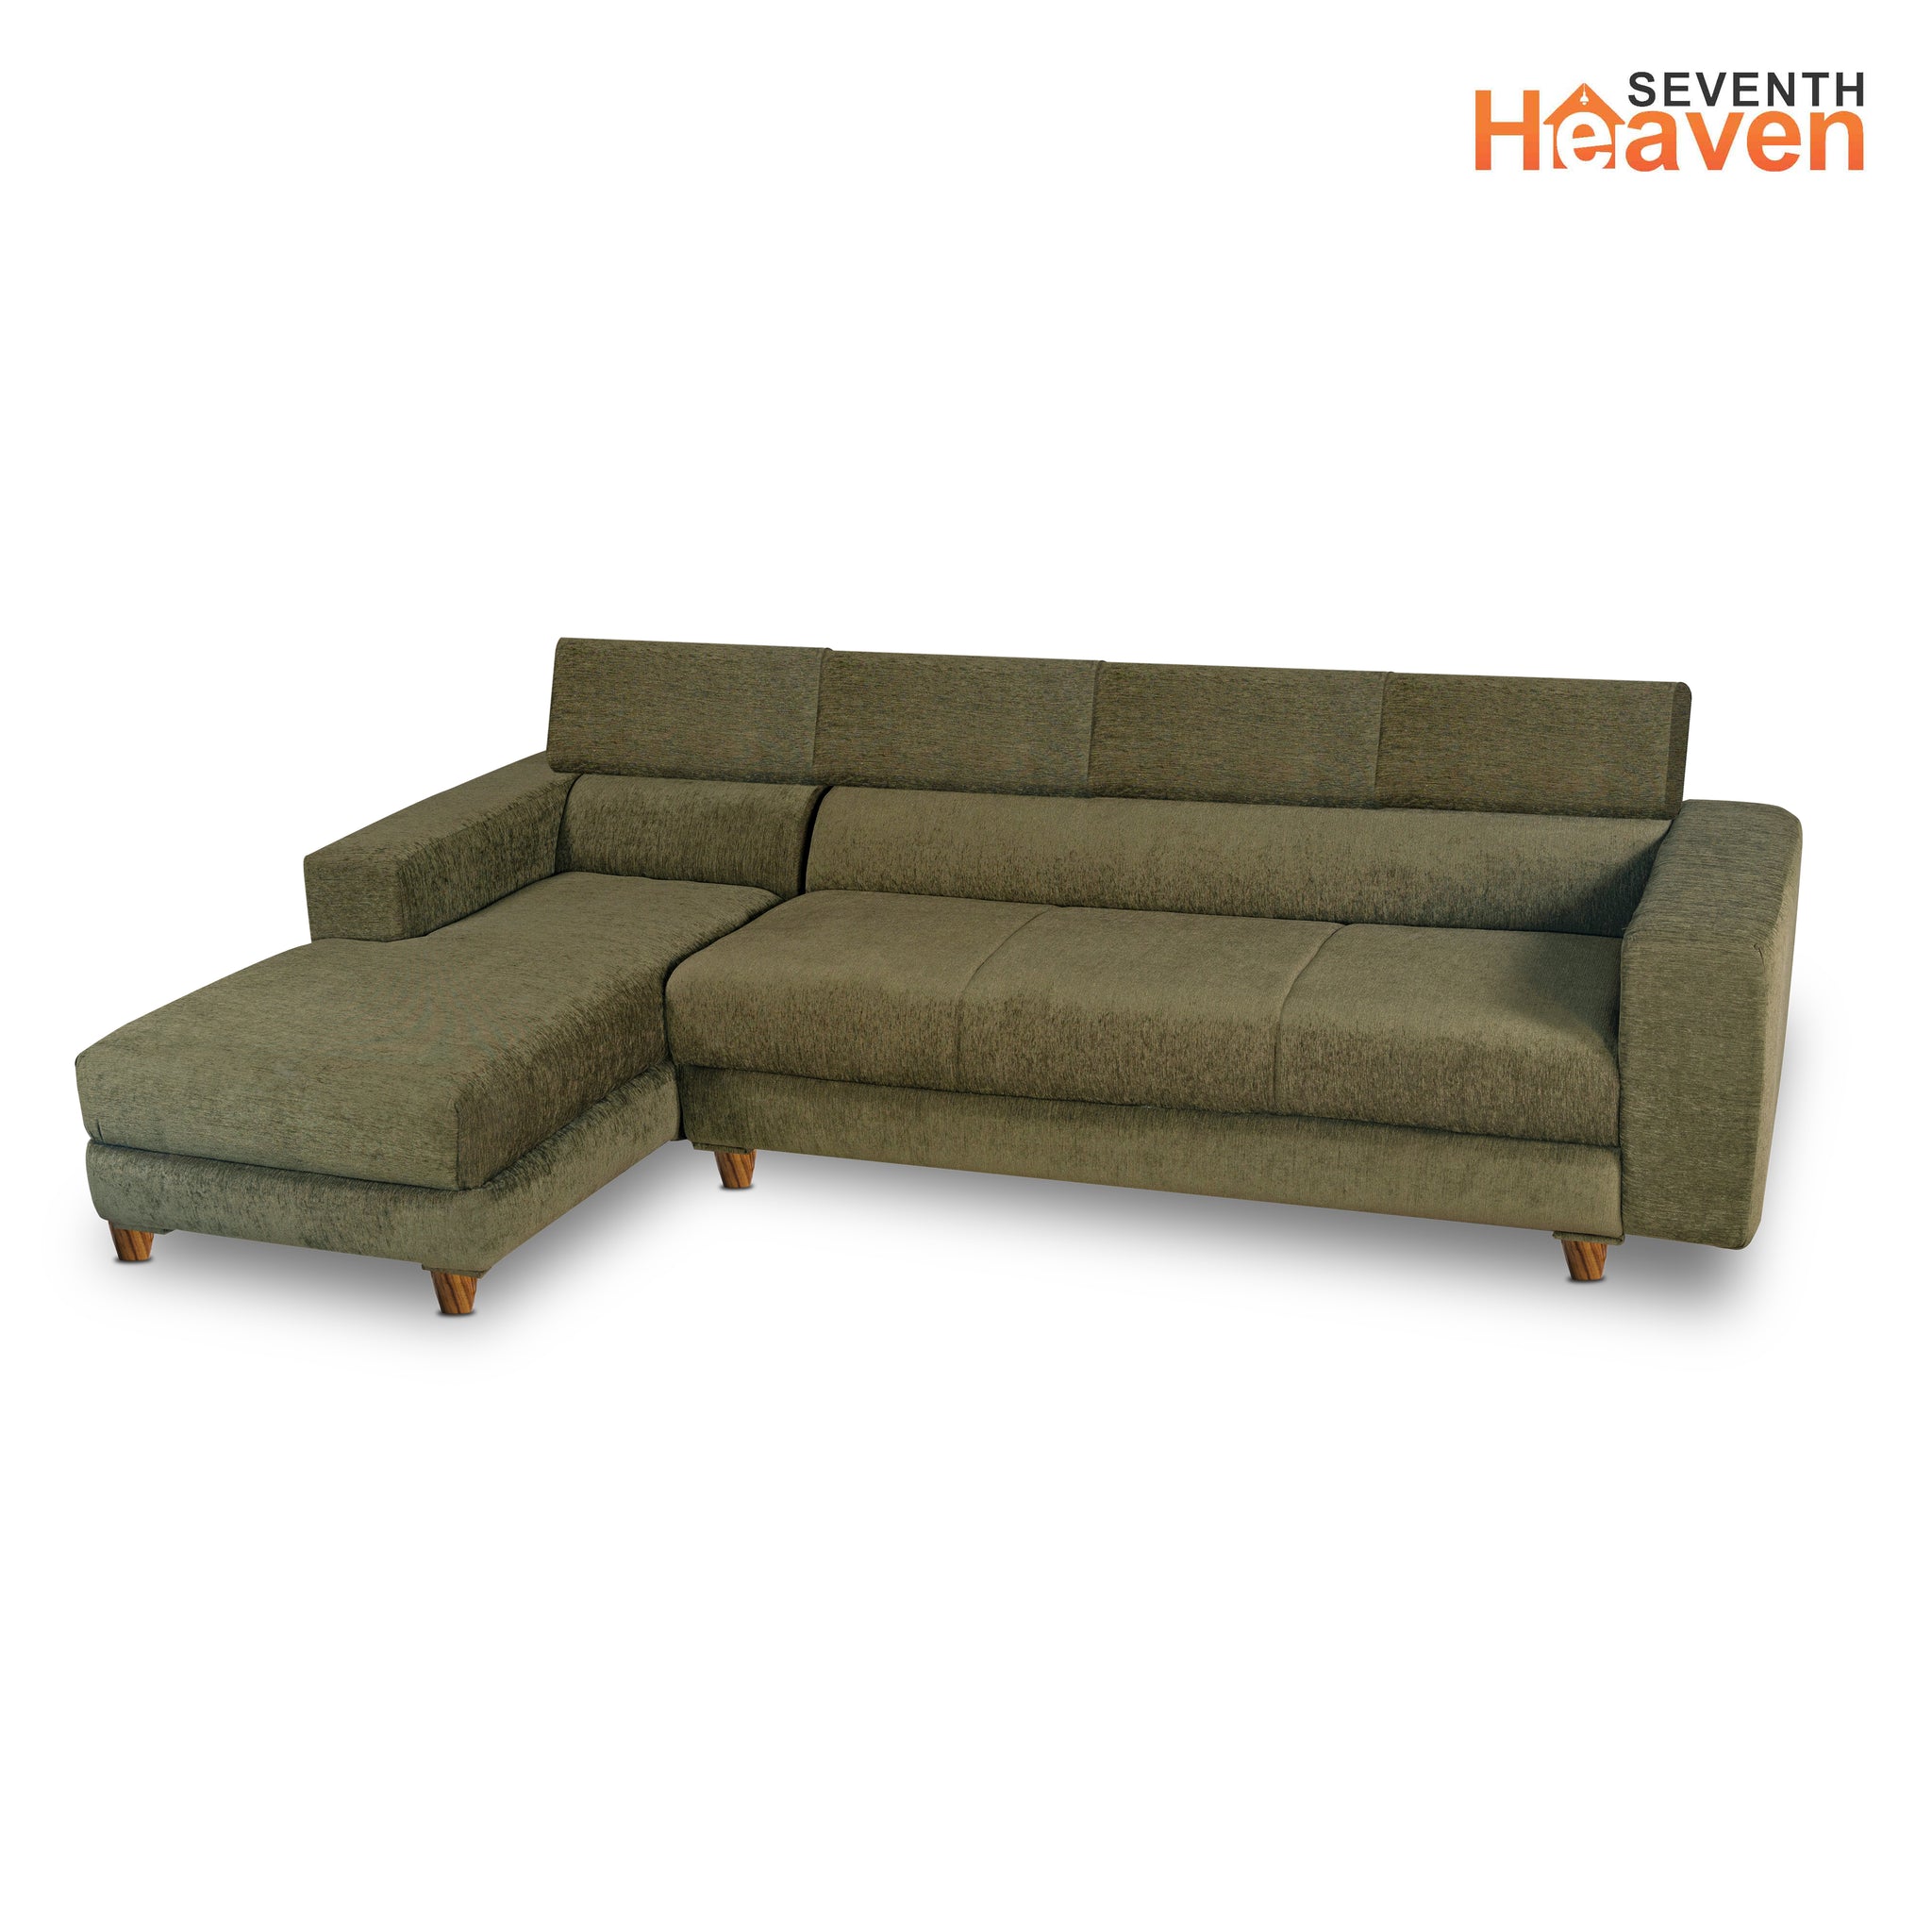 Berlin 6 Seater Sofa, Extra Spacious, Chenille Molfino Fabric with 3 Years Warranty( Finish Color - Green, Style - Left Corner Sofa)